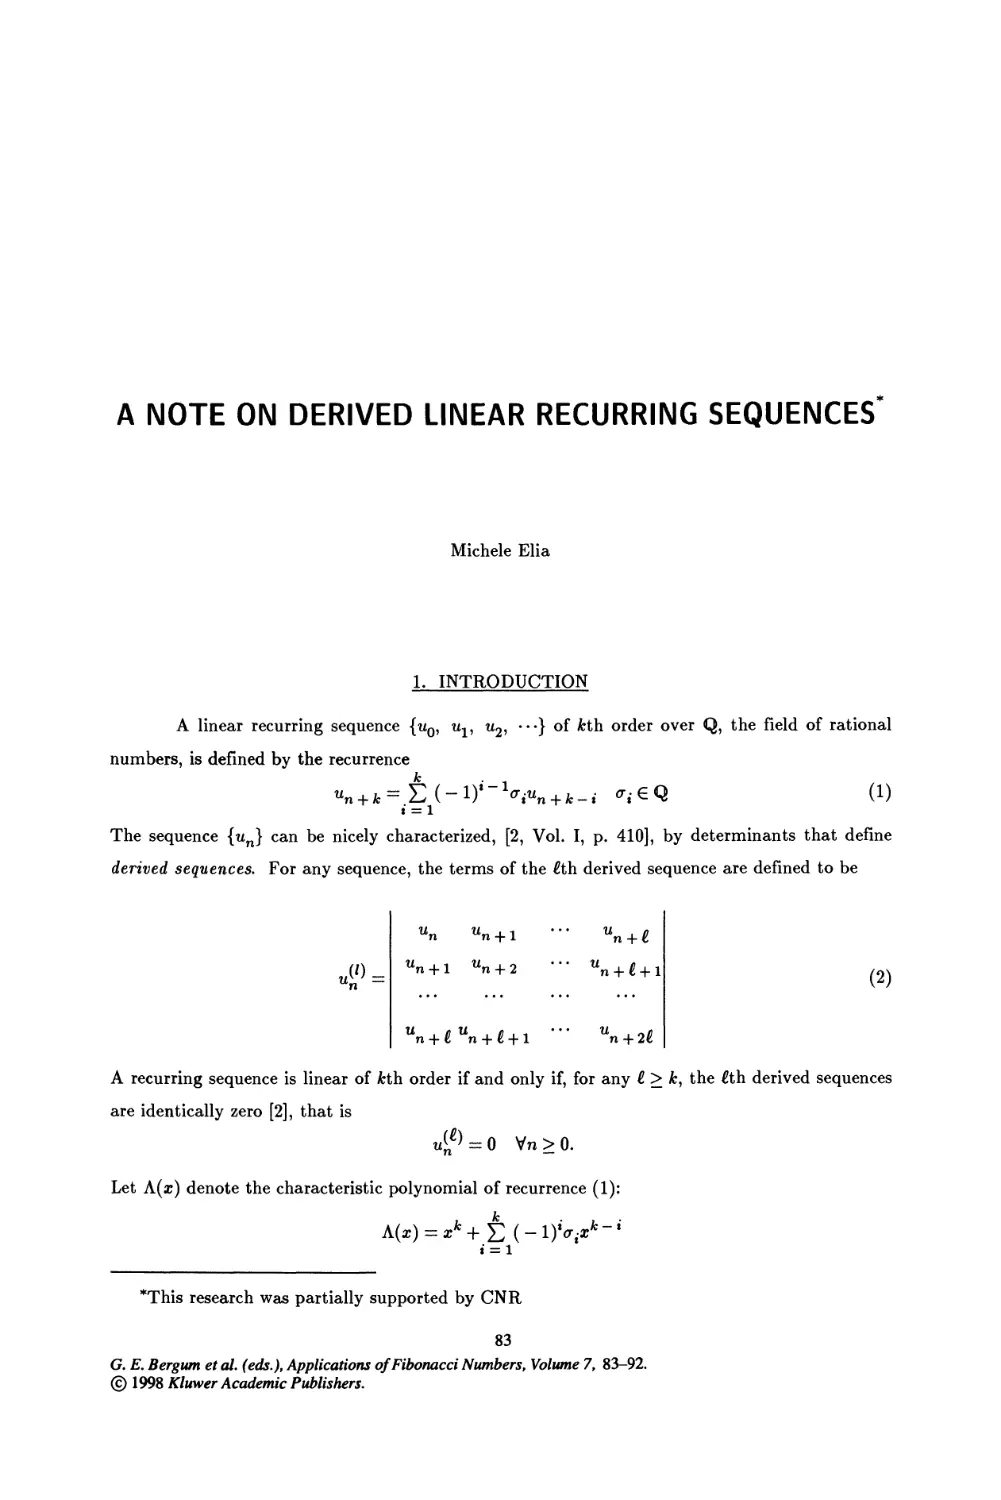 12. A Note on Derived Linear Recurring Sequences*